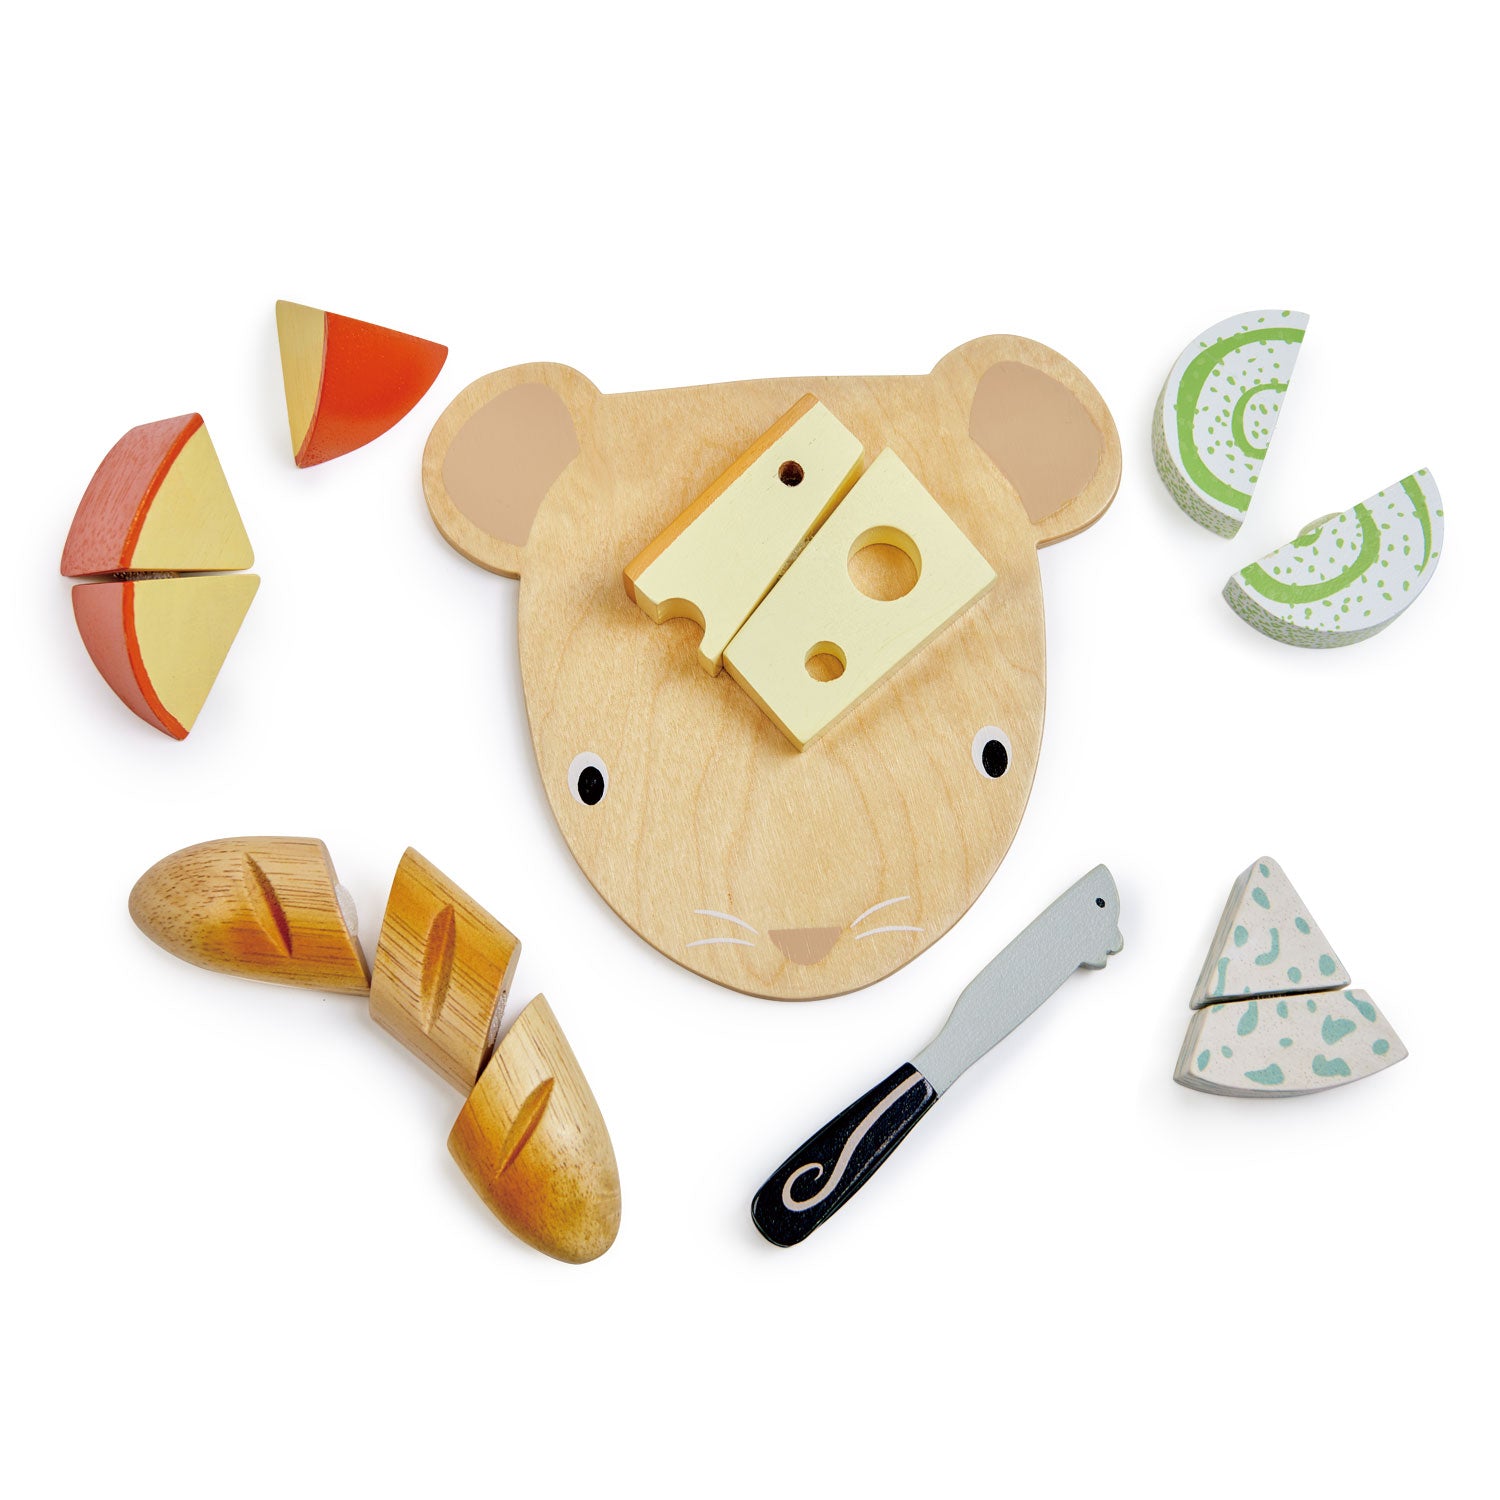 <p>A mouse-shaped wooden cheese board with a mousey cheese knife. A baguette in 3 parts, an Edam cheese in 3 parts, a Gruyere, a Rouleaux, and a blue cheese in 2 parts. Attached with velcro for easy cutting. Netting bag for tidying away included.</p>
<p>Age range: 2 years +  </p>
<p>Product size: 5.91 x 6.69 x 2.76”  </p>
<p>Weight: 0.48 Ibs</p>
<p><strong>Related Products</strong><a href="https://kids.allwomenstalk.com/products/mini-chef-chopping-board">Mini Chef Chopping Board</a><a href="https://kids.allwomenstalk.com/products/tropical-fruit-chopping-board">Tropical Fruit Chopping Board</a></p>
<p><a href="https://www.dropbox.com/s/rb18qp6qukpgaam/TL8293%20Cheese%20Chopping%20Board%20Printable.pdf?dl=0"><strong>Download Cheese Chopping Board Printable</strong></a></p>
